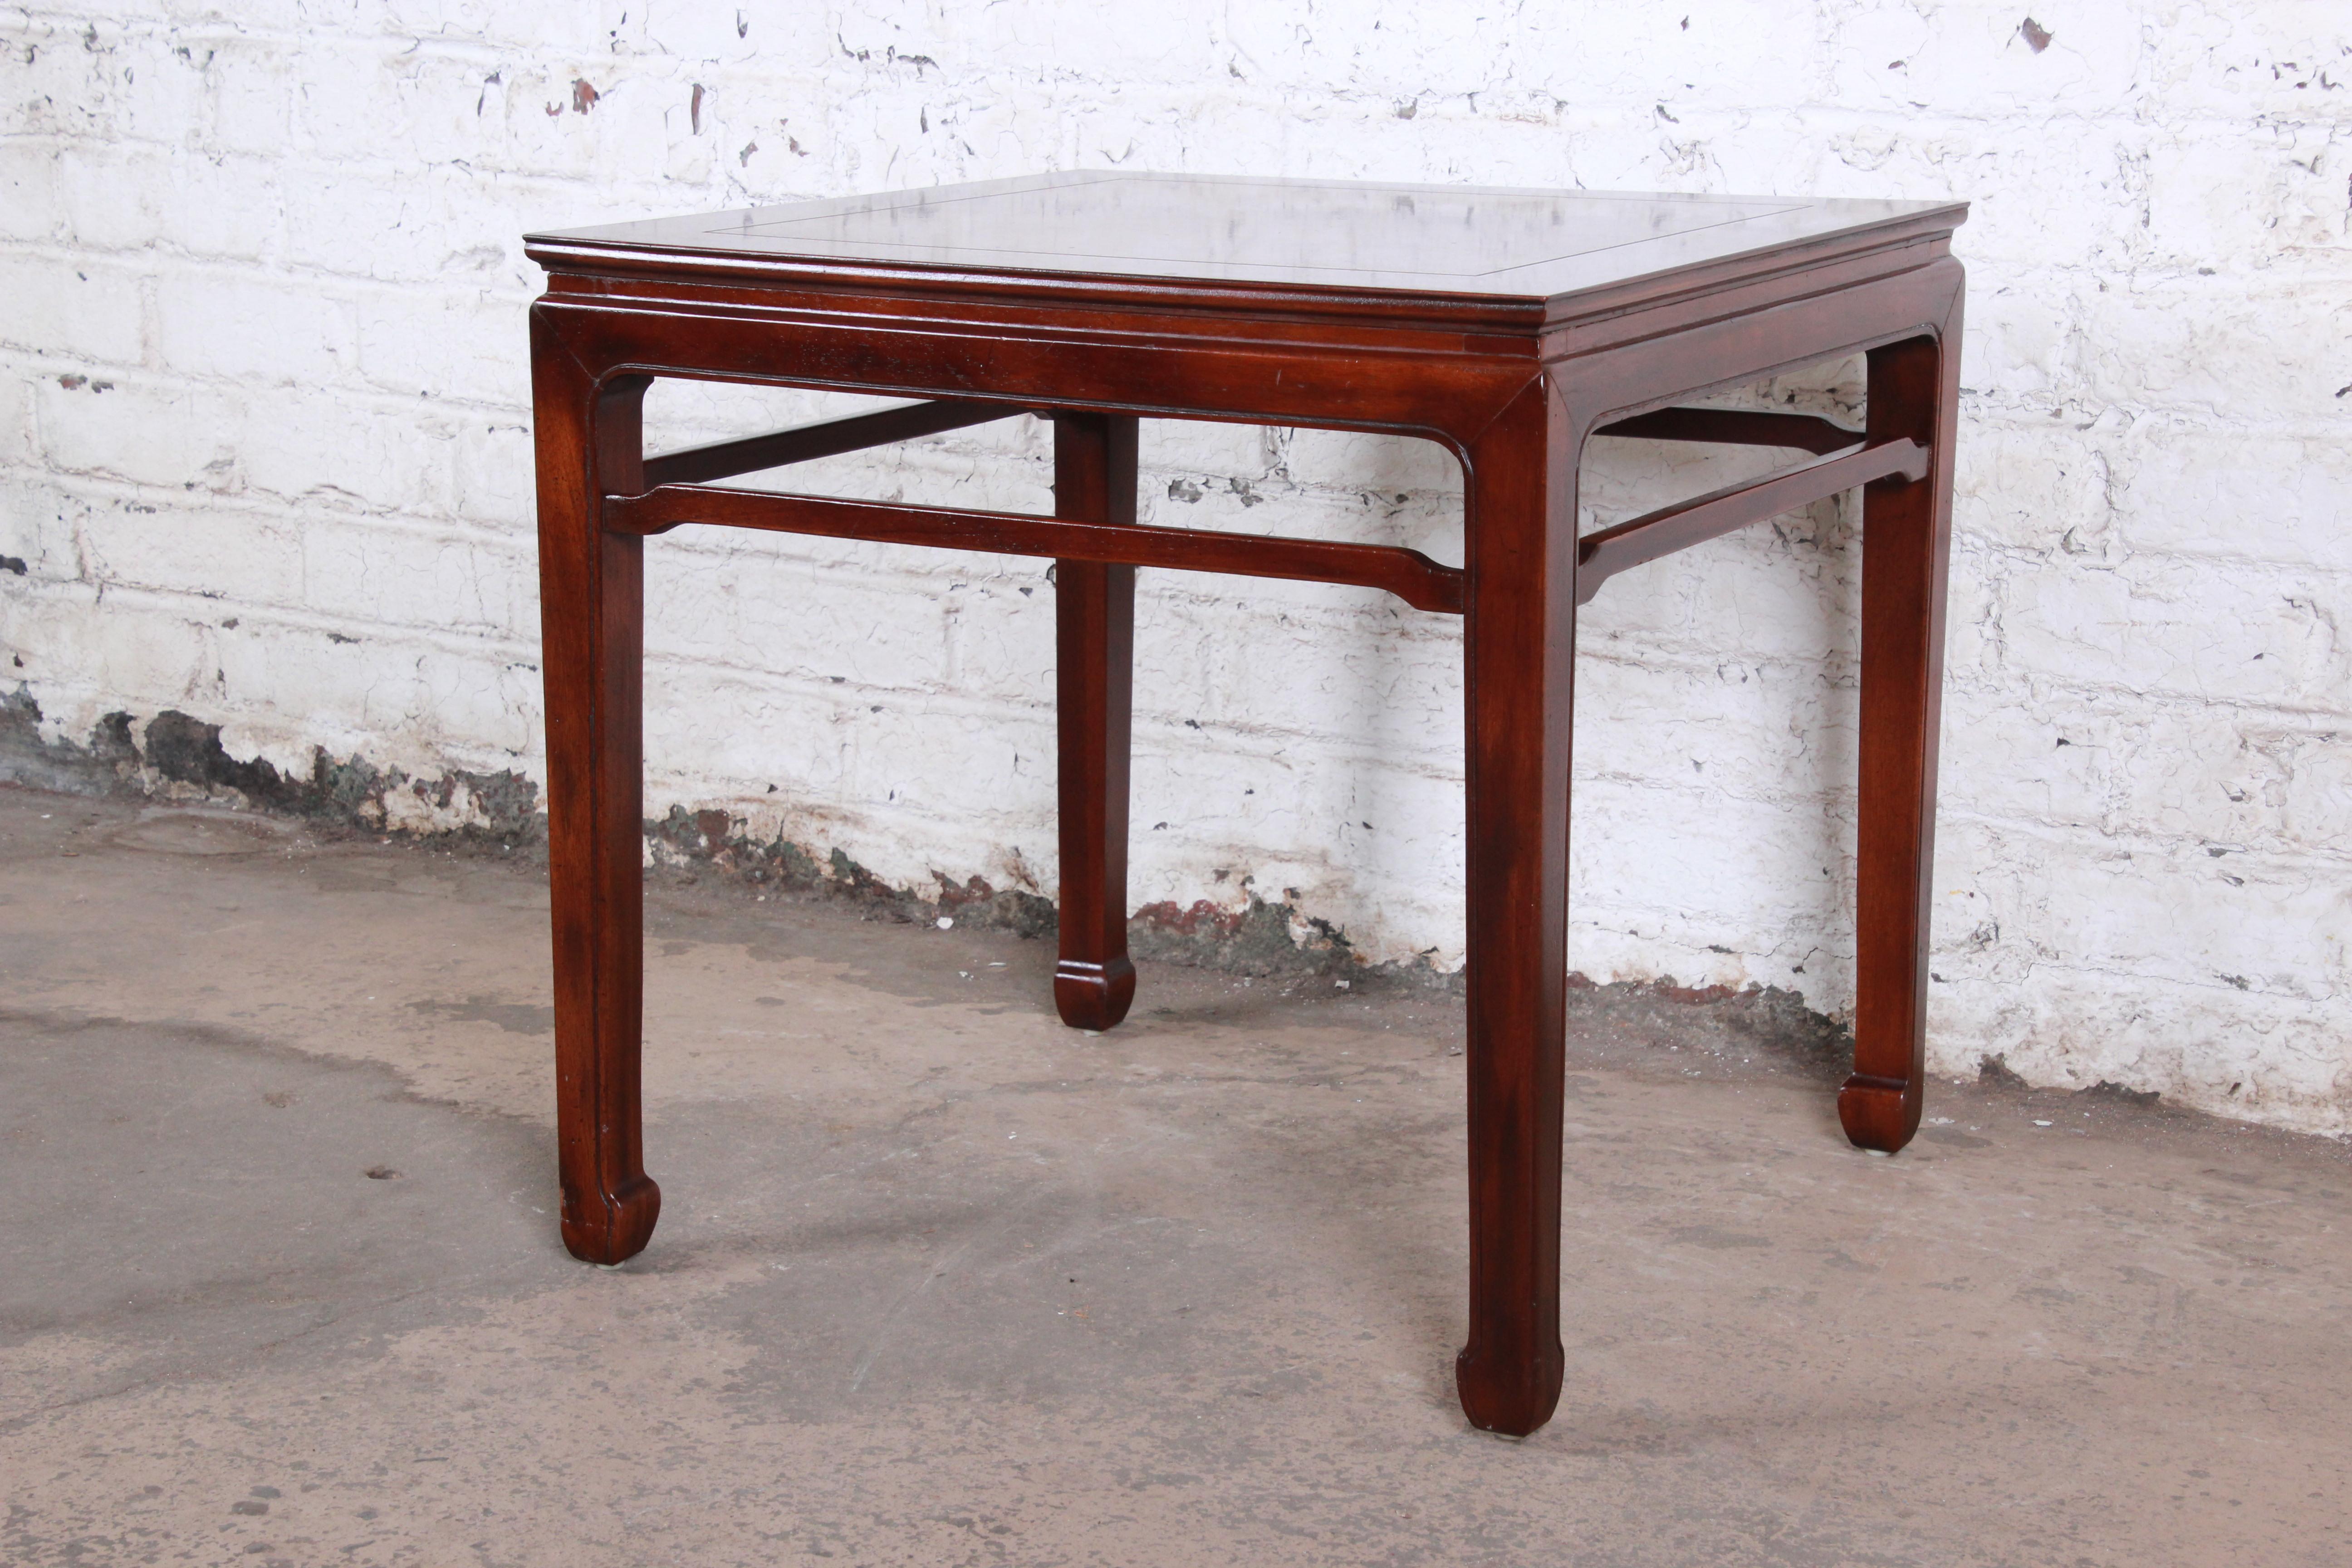 A gorgeous midcentury Hollywood Regency chinoiserie side table by Henredon. The table features nice mahogany wood grain with a beautiful burl wood top and subtle Asian flair. The original Henredon label is present. The table is in very good original